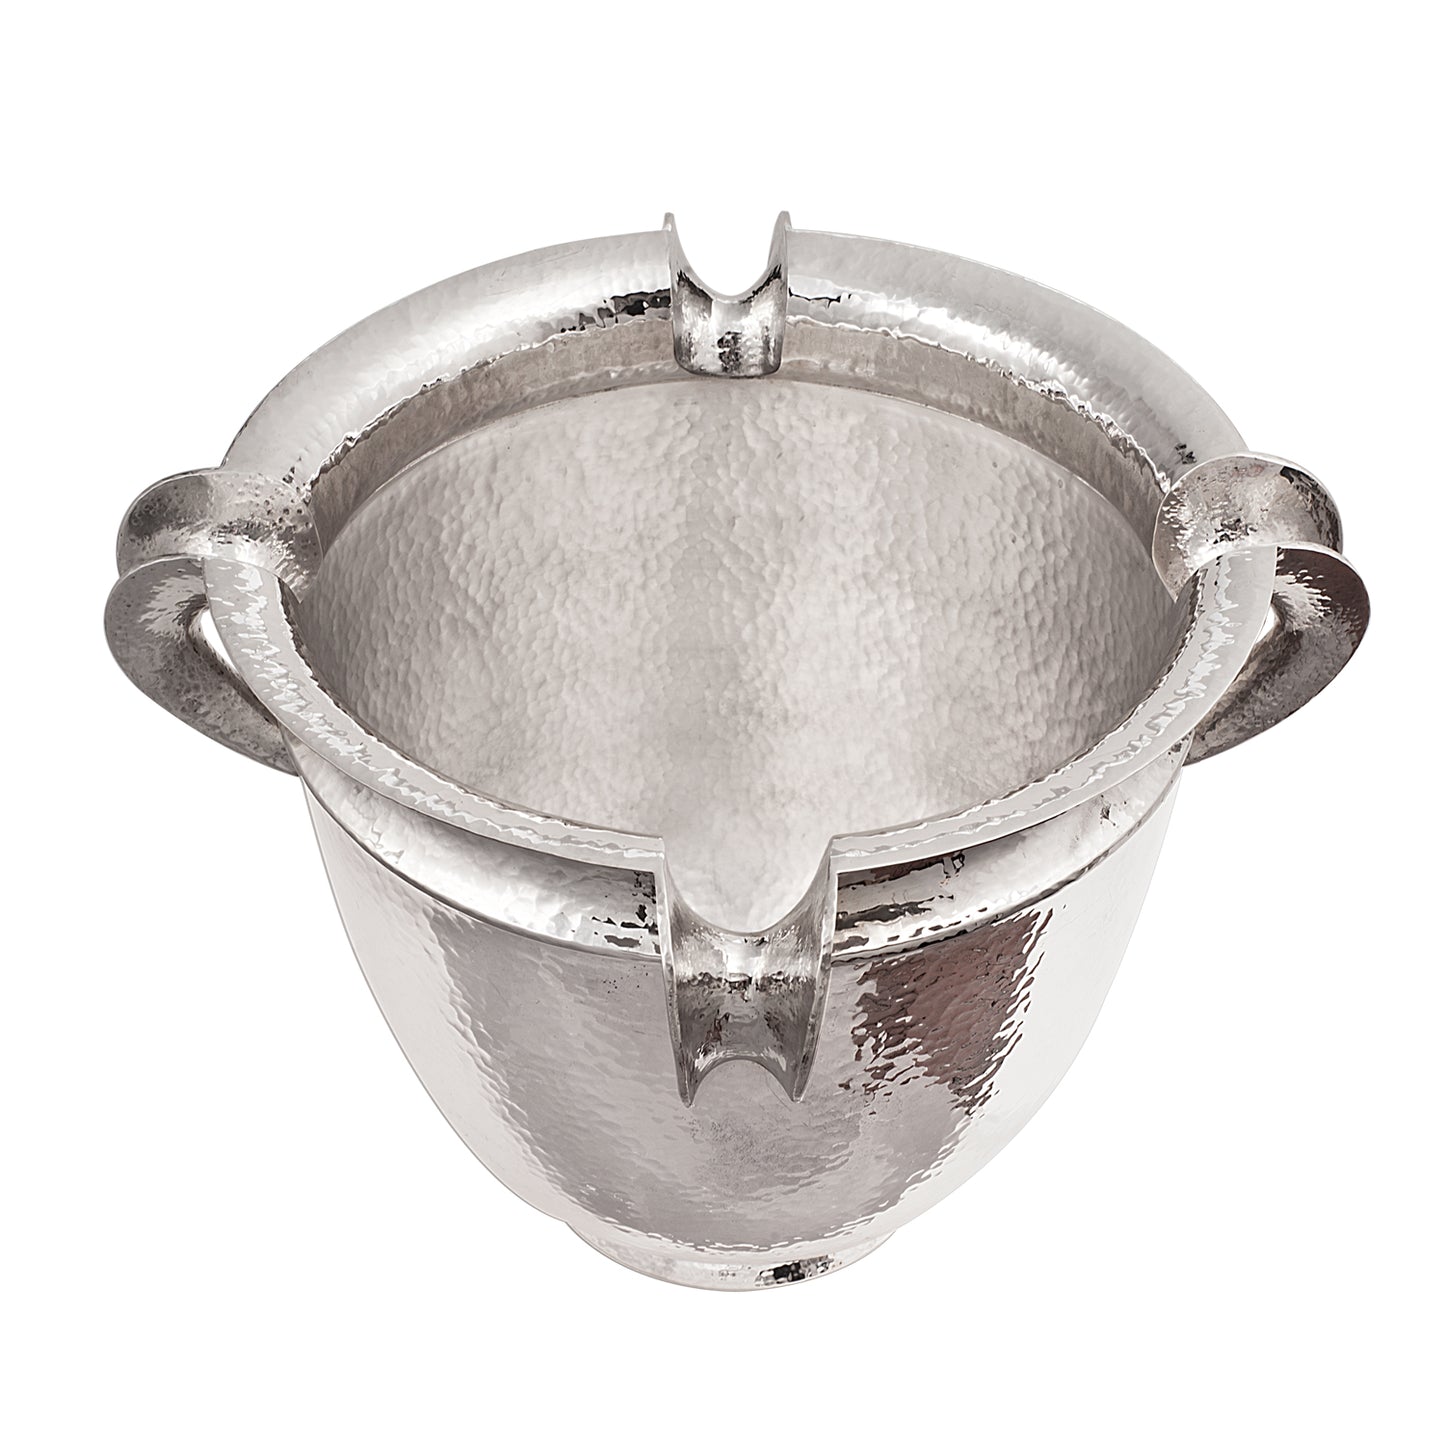 TROIA STERLING SILVER- WINE COOLER